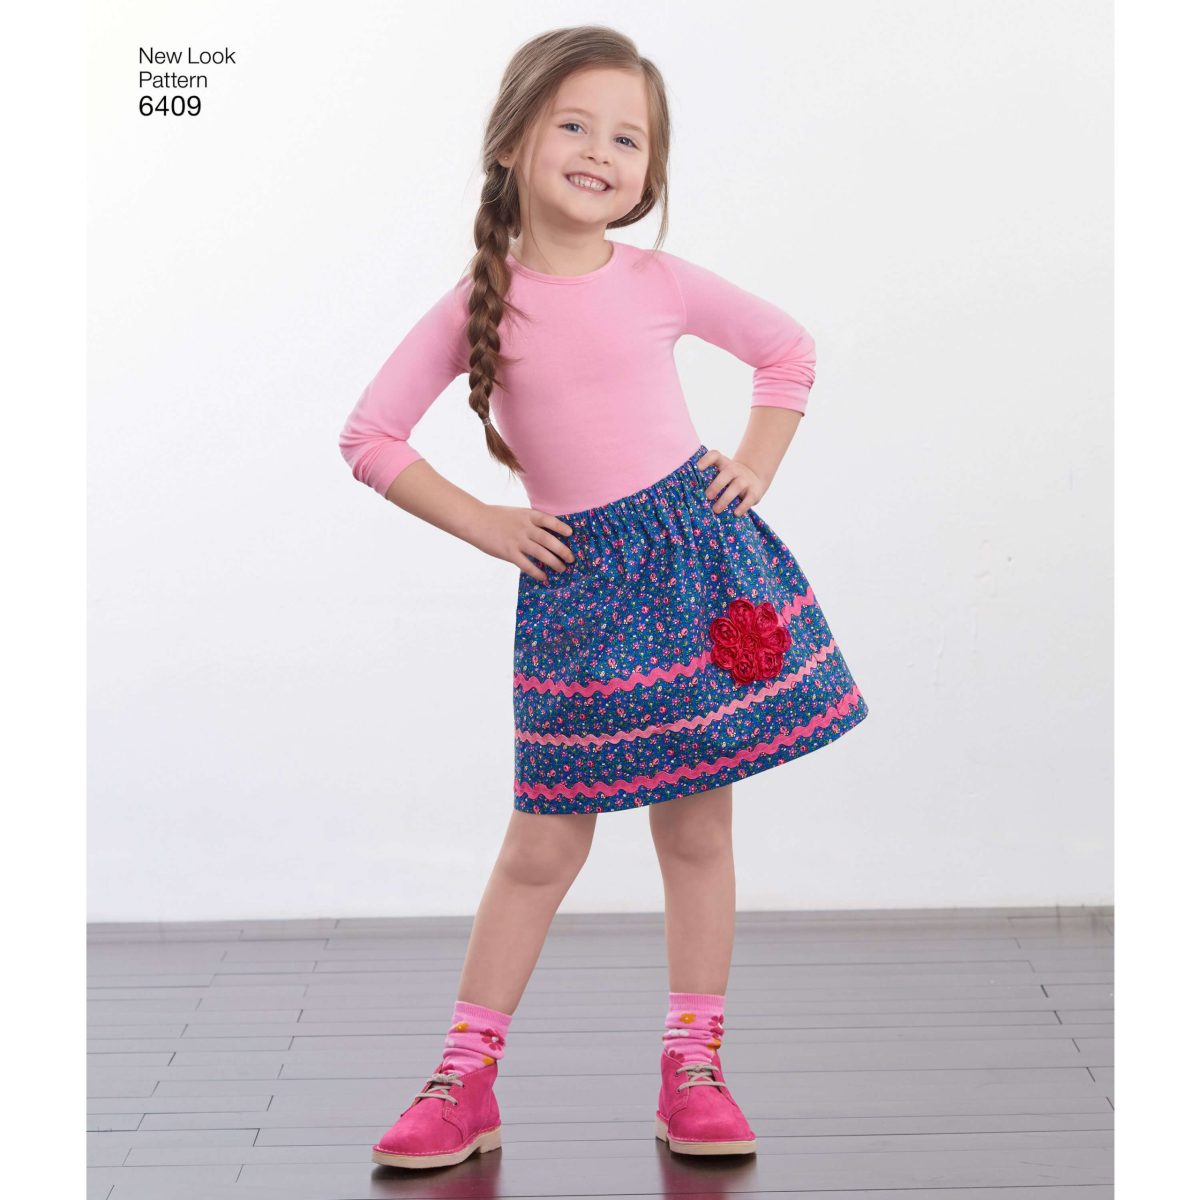 New Look Sewing Pattern N6409 Child's Pull-On Skirts